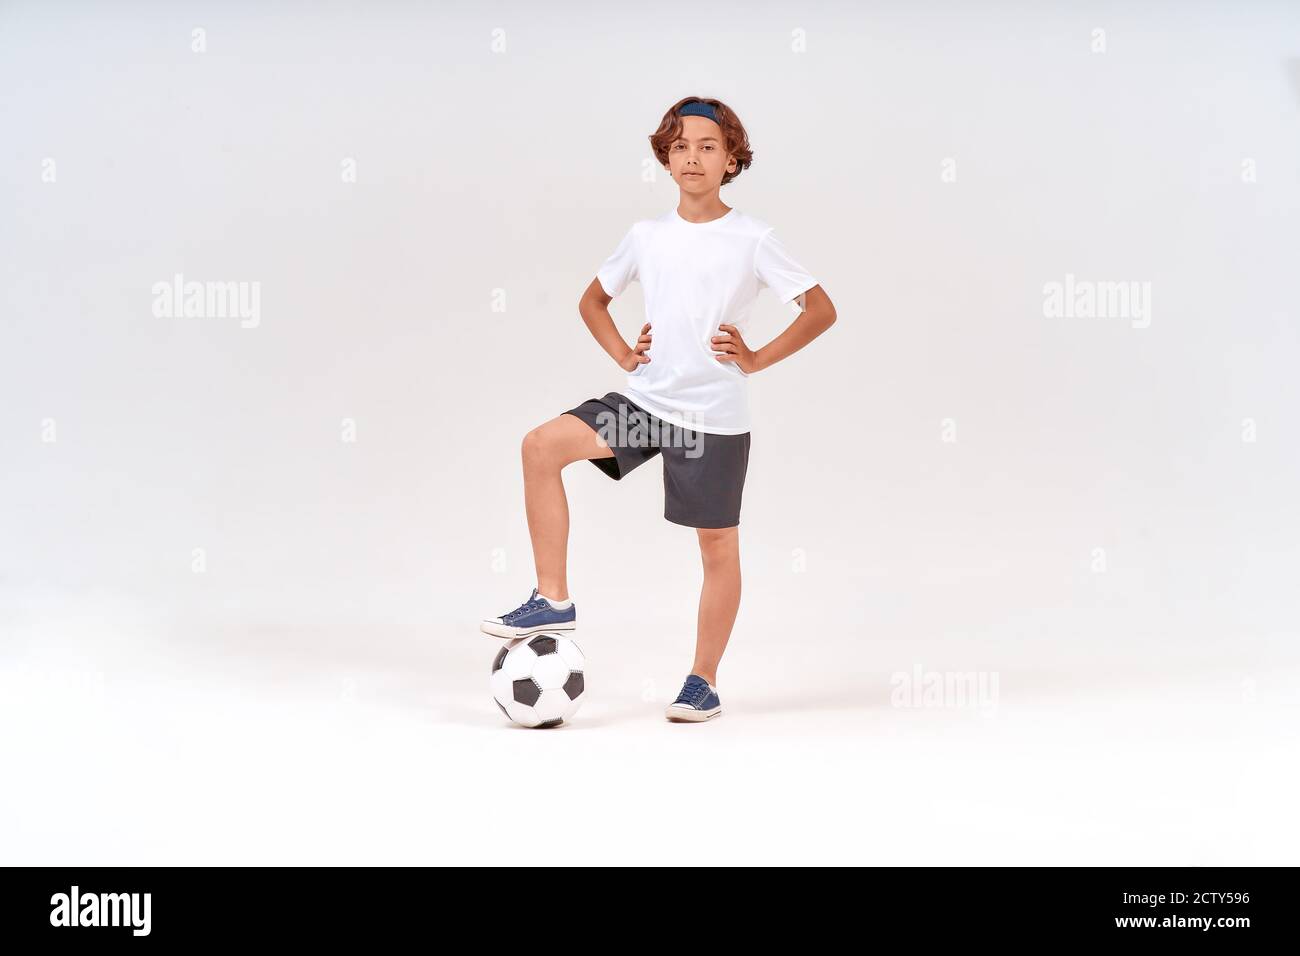 Football player. Full-length shot of a happy teenage boy with soccer ball looking at camera and smiling while standing isolated over grey background Stock Photo